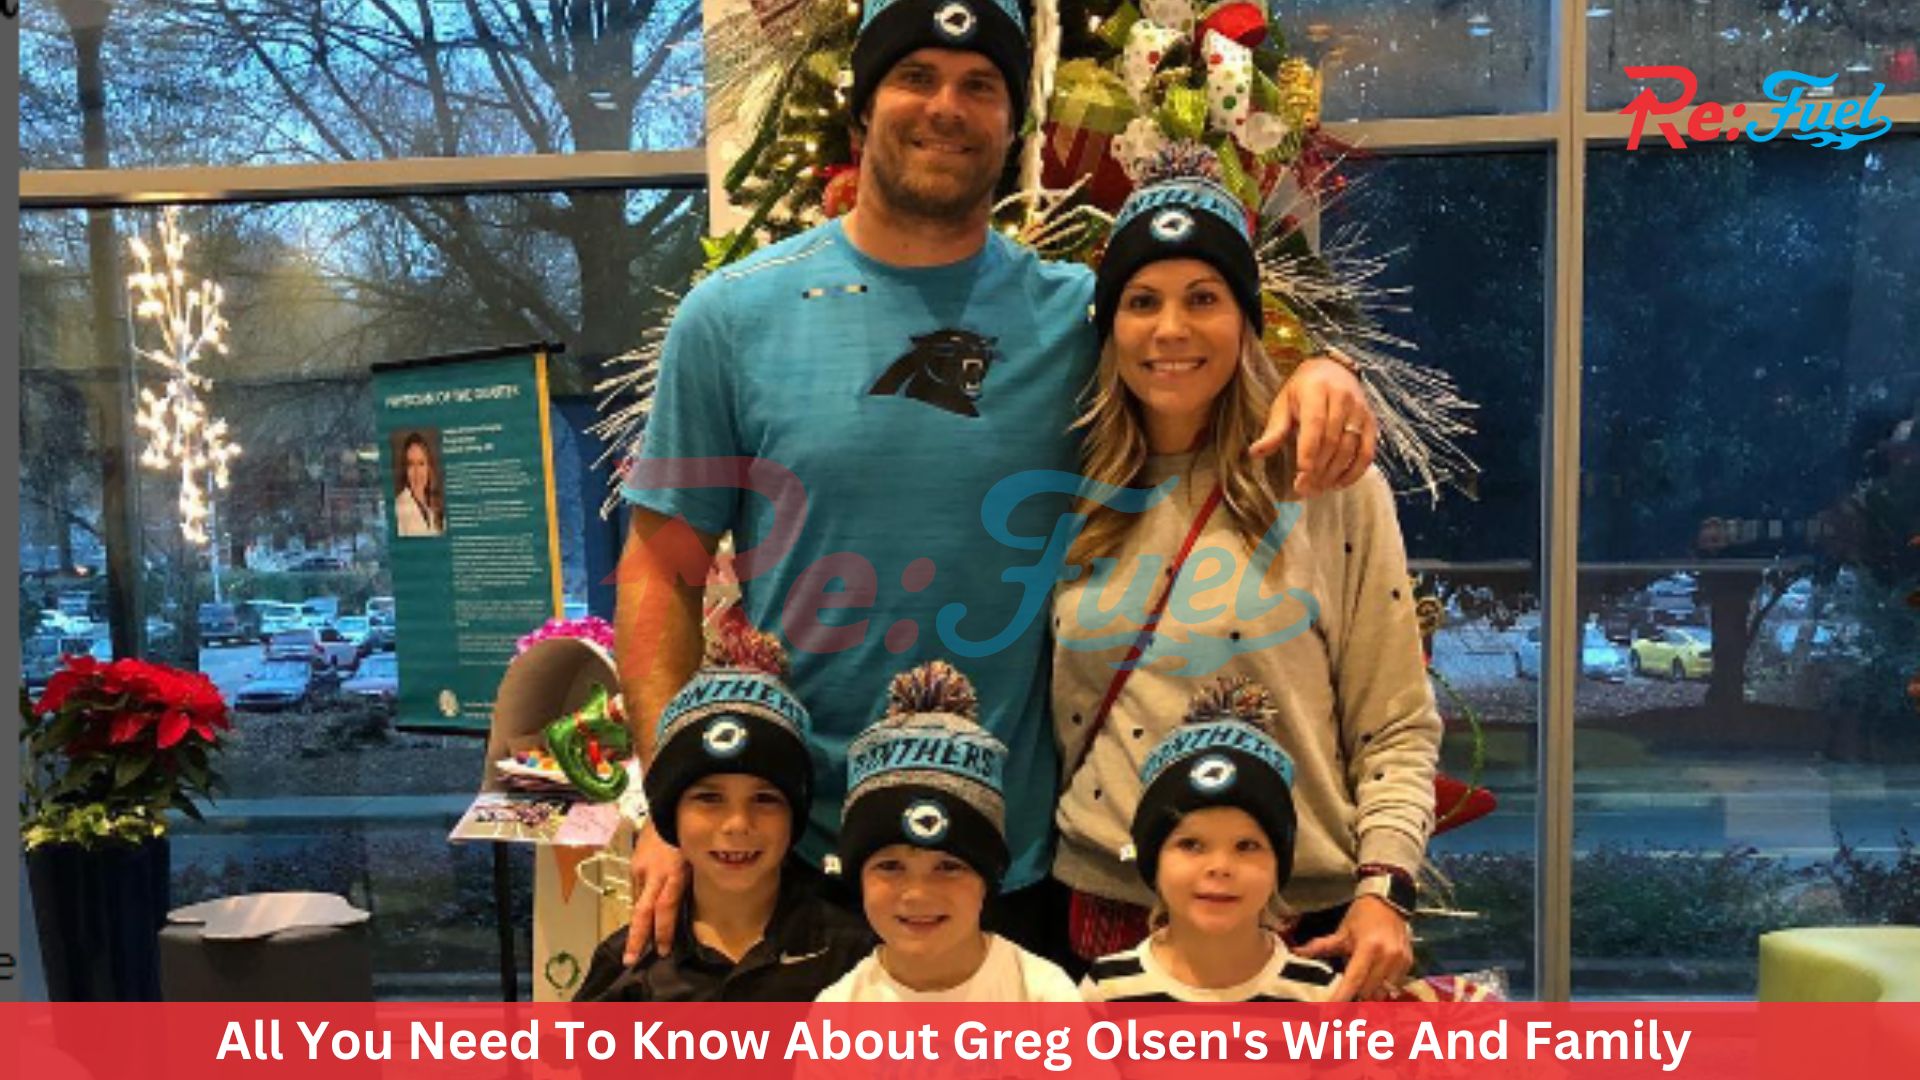 All You Need To Know About Greg Olsen's Wife And Family